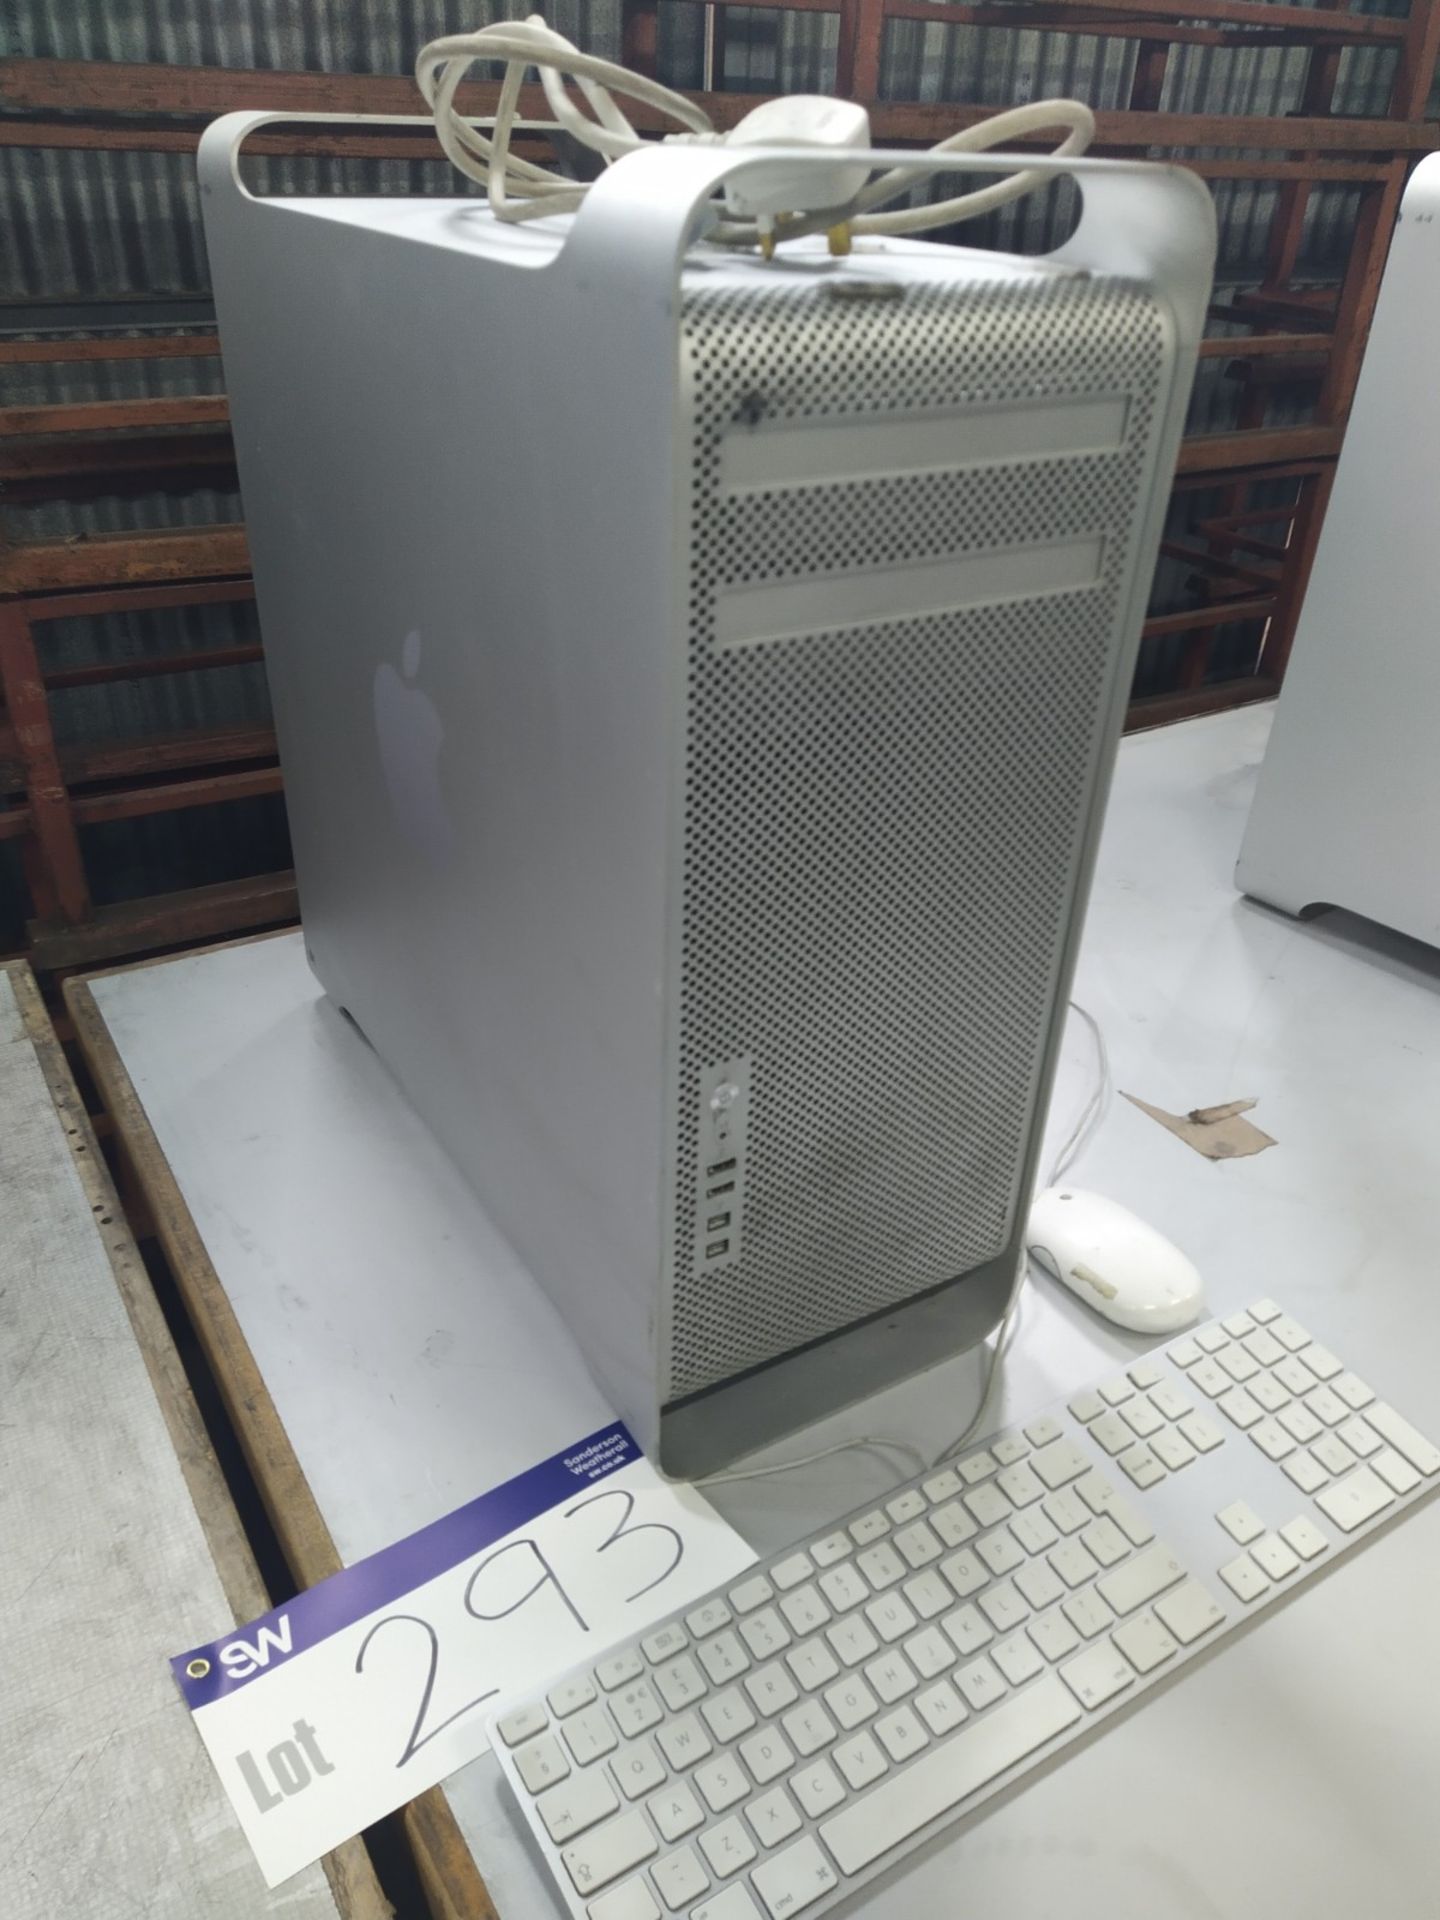 Apple Mac Pro computer, keyboard and mouse, free loading onto purchasers transport - yes, item - Image 4 of 5